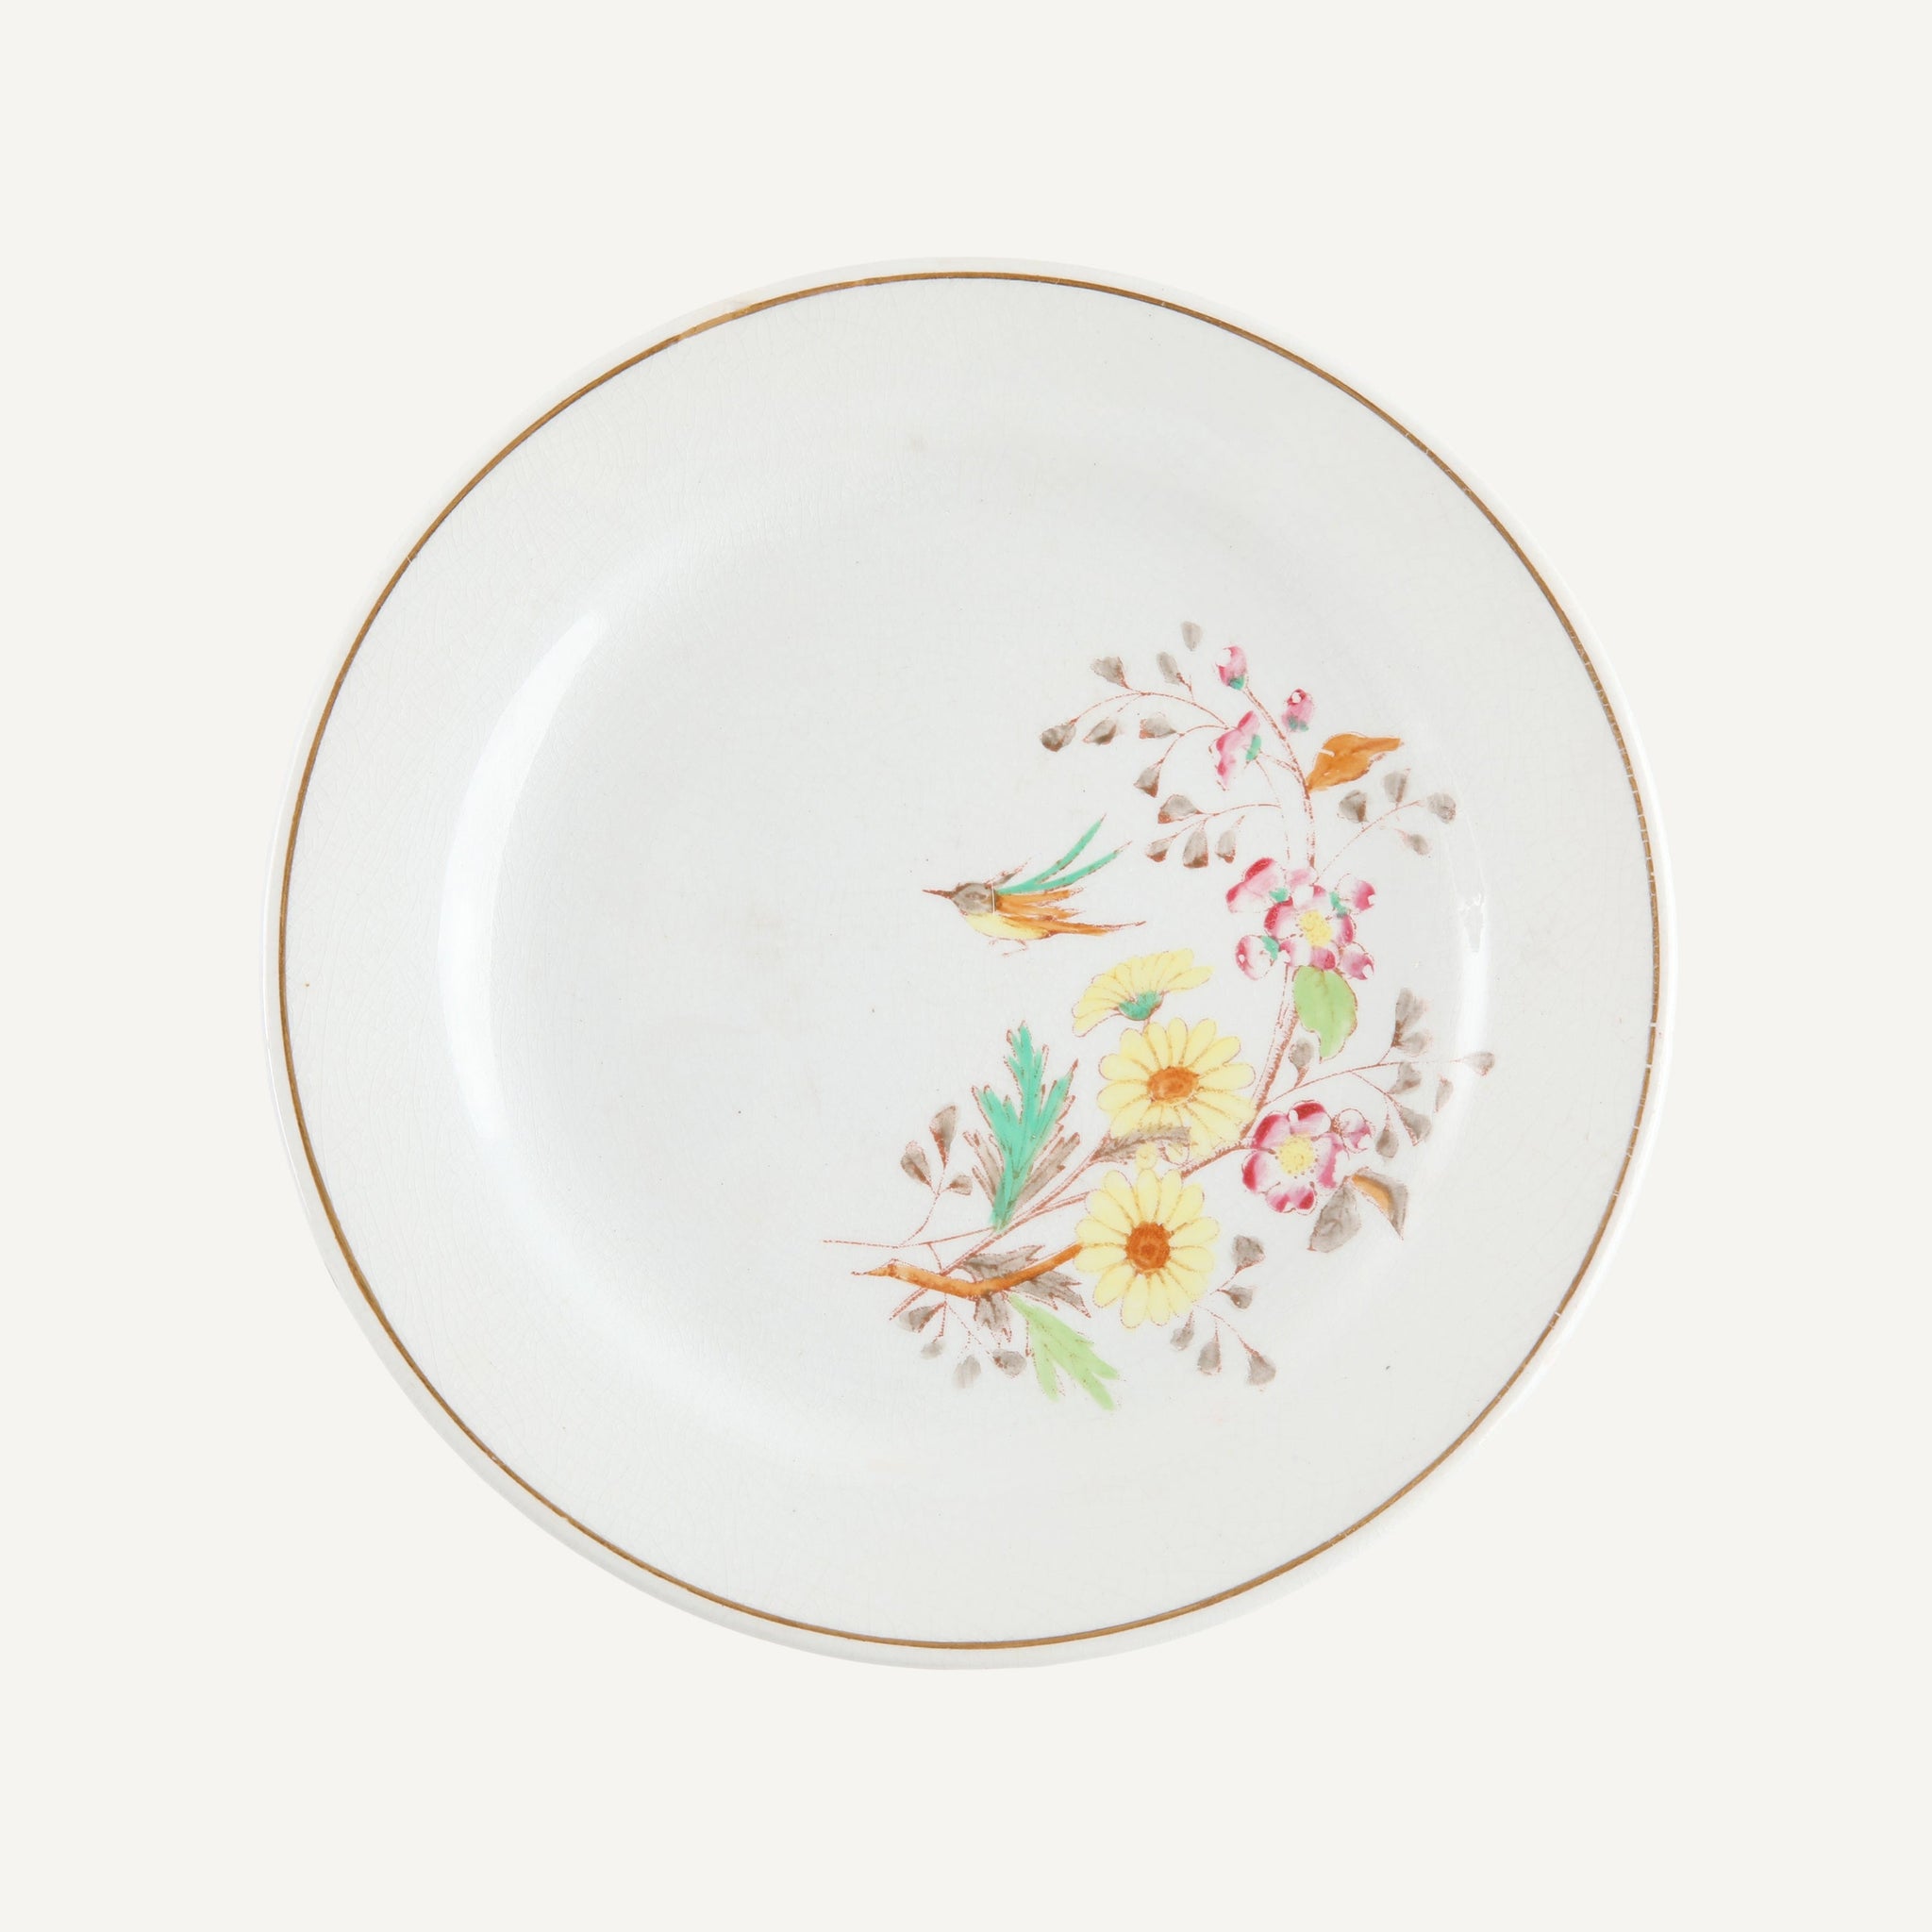 ANTIQUE EARLY ENGLISH PLATES